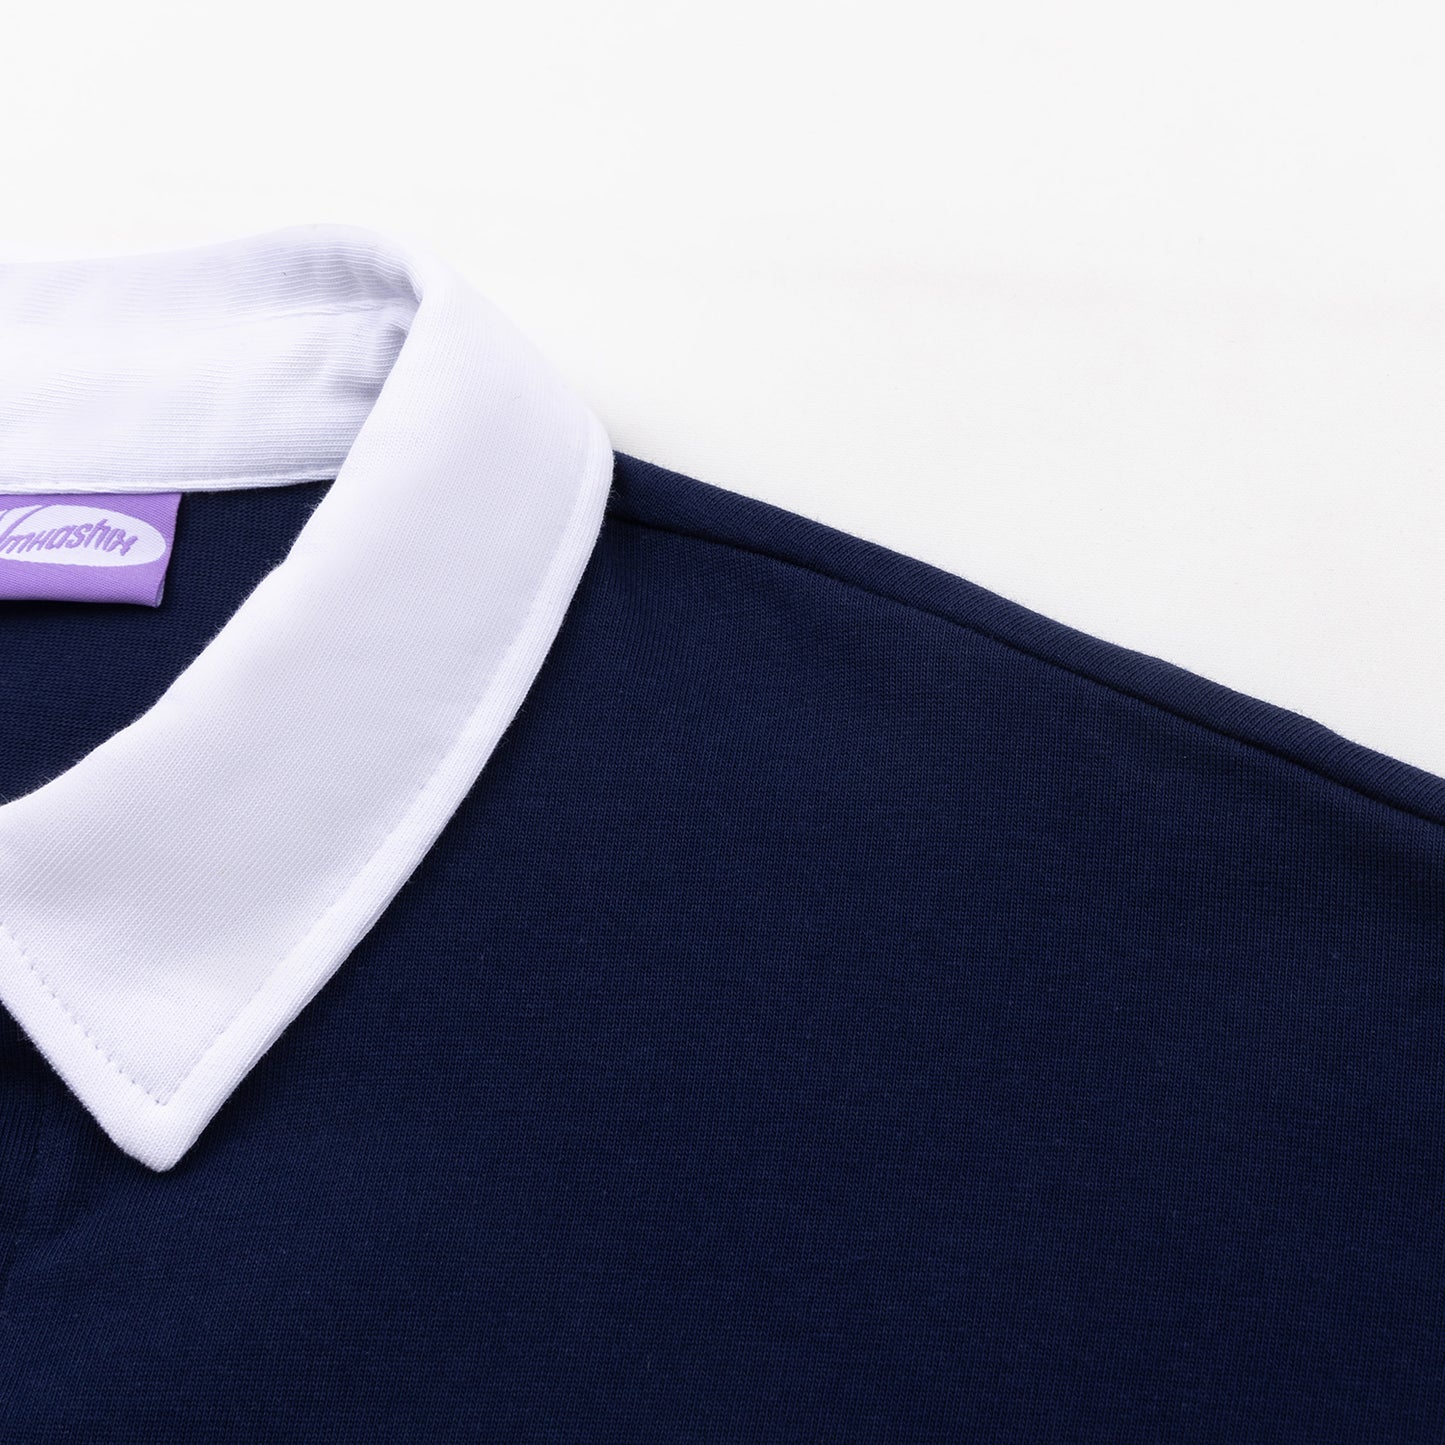 Shirt Rugby, navy